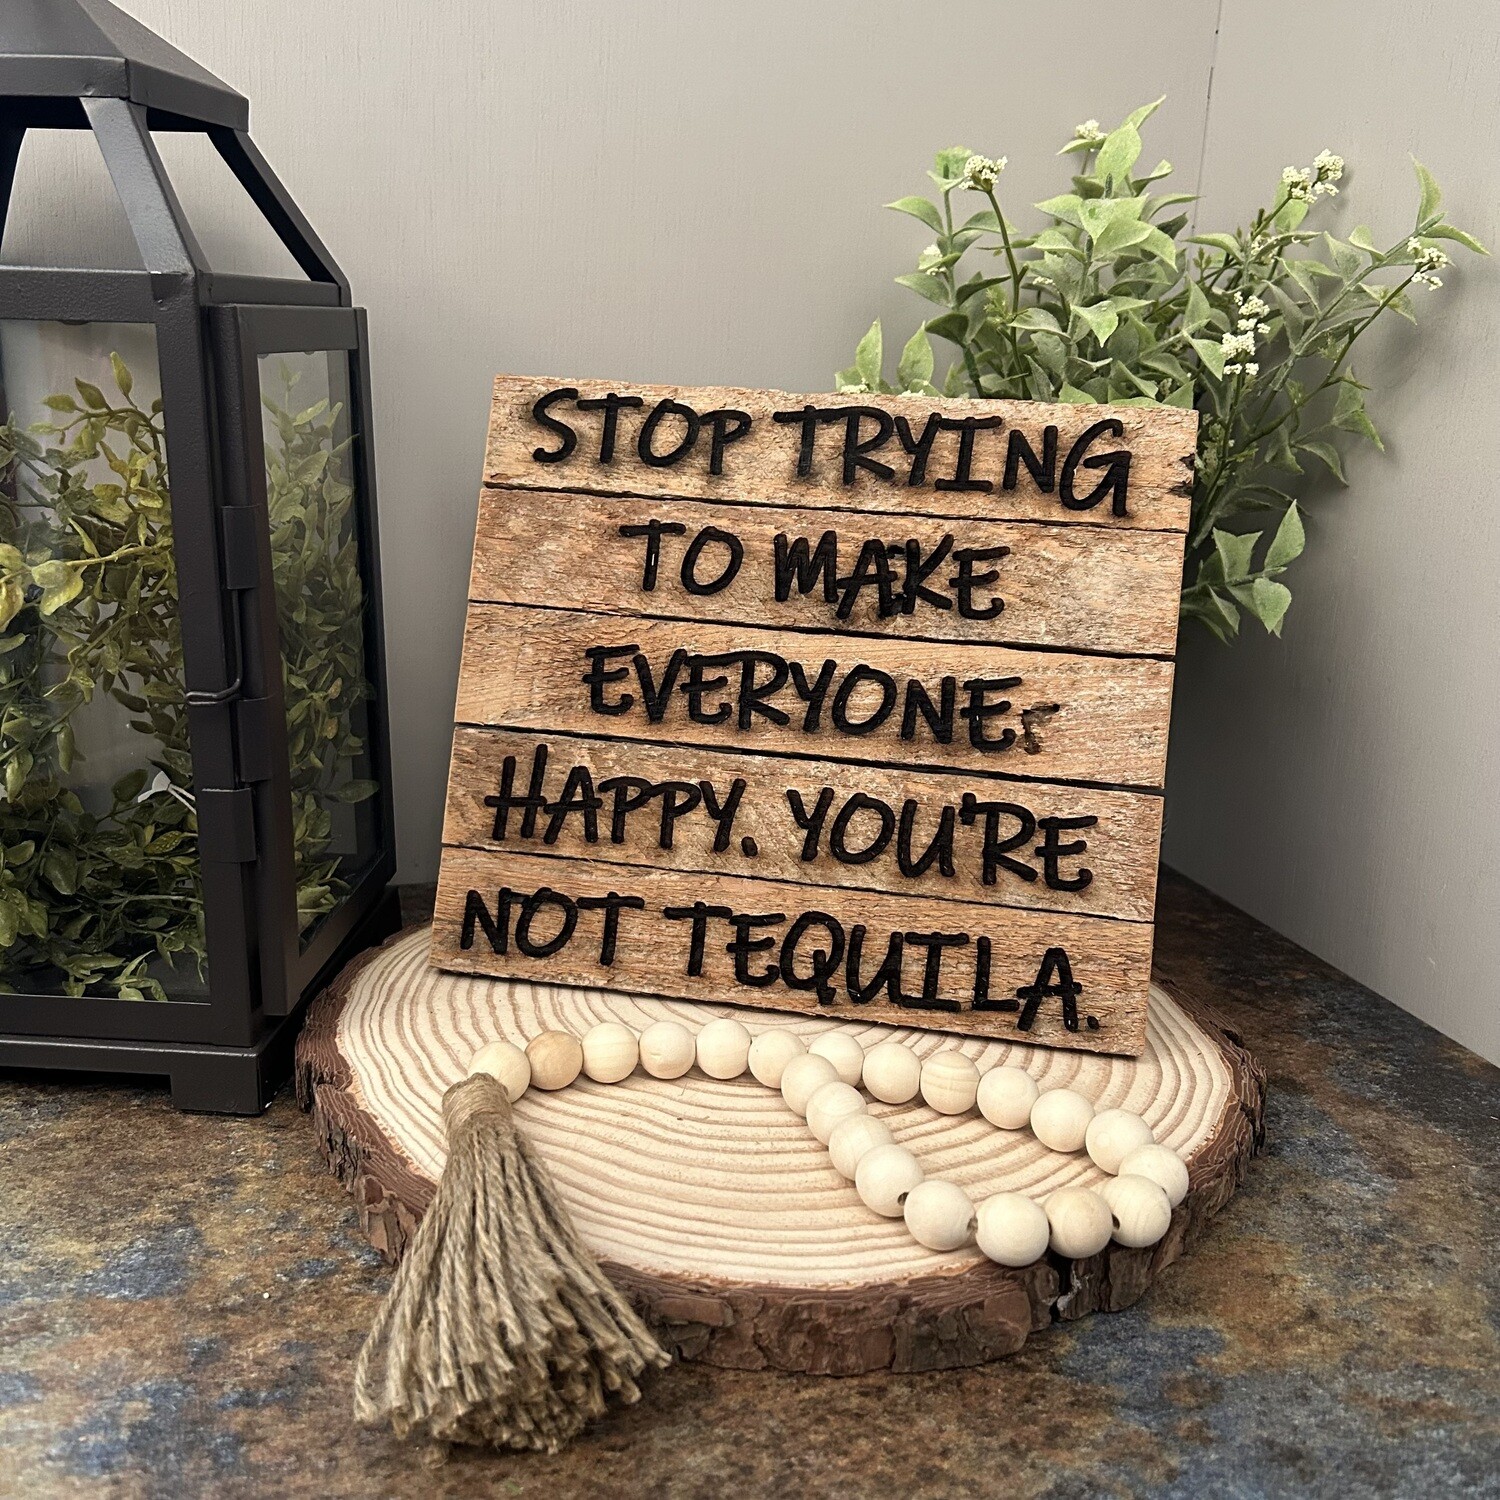 Stop Trying to Make - Lath sign